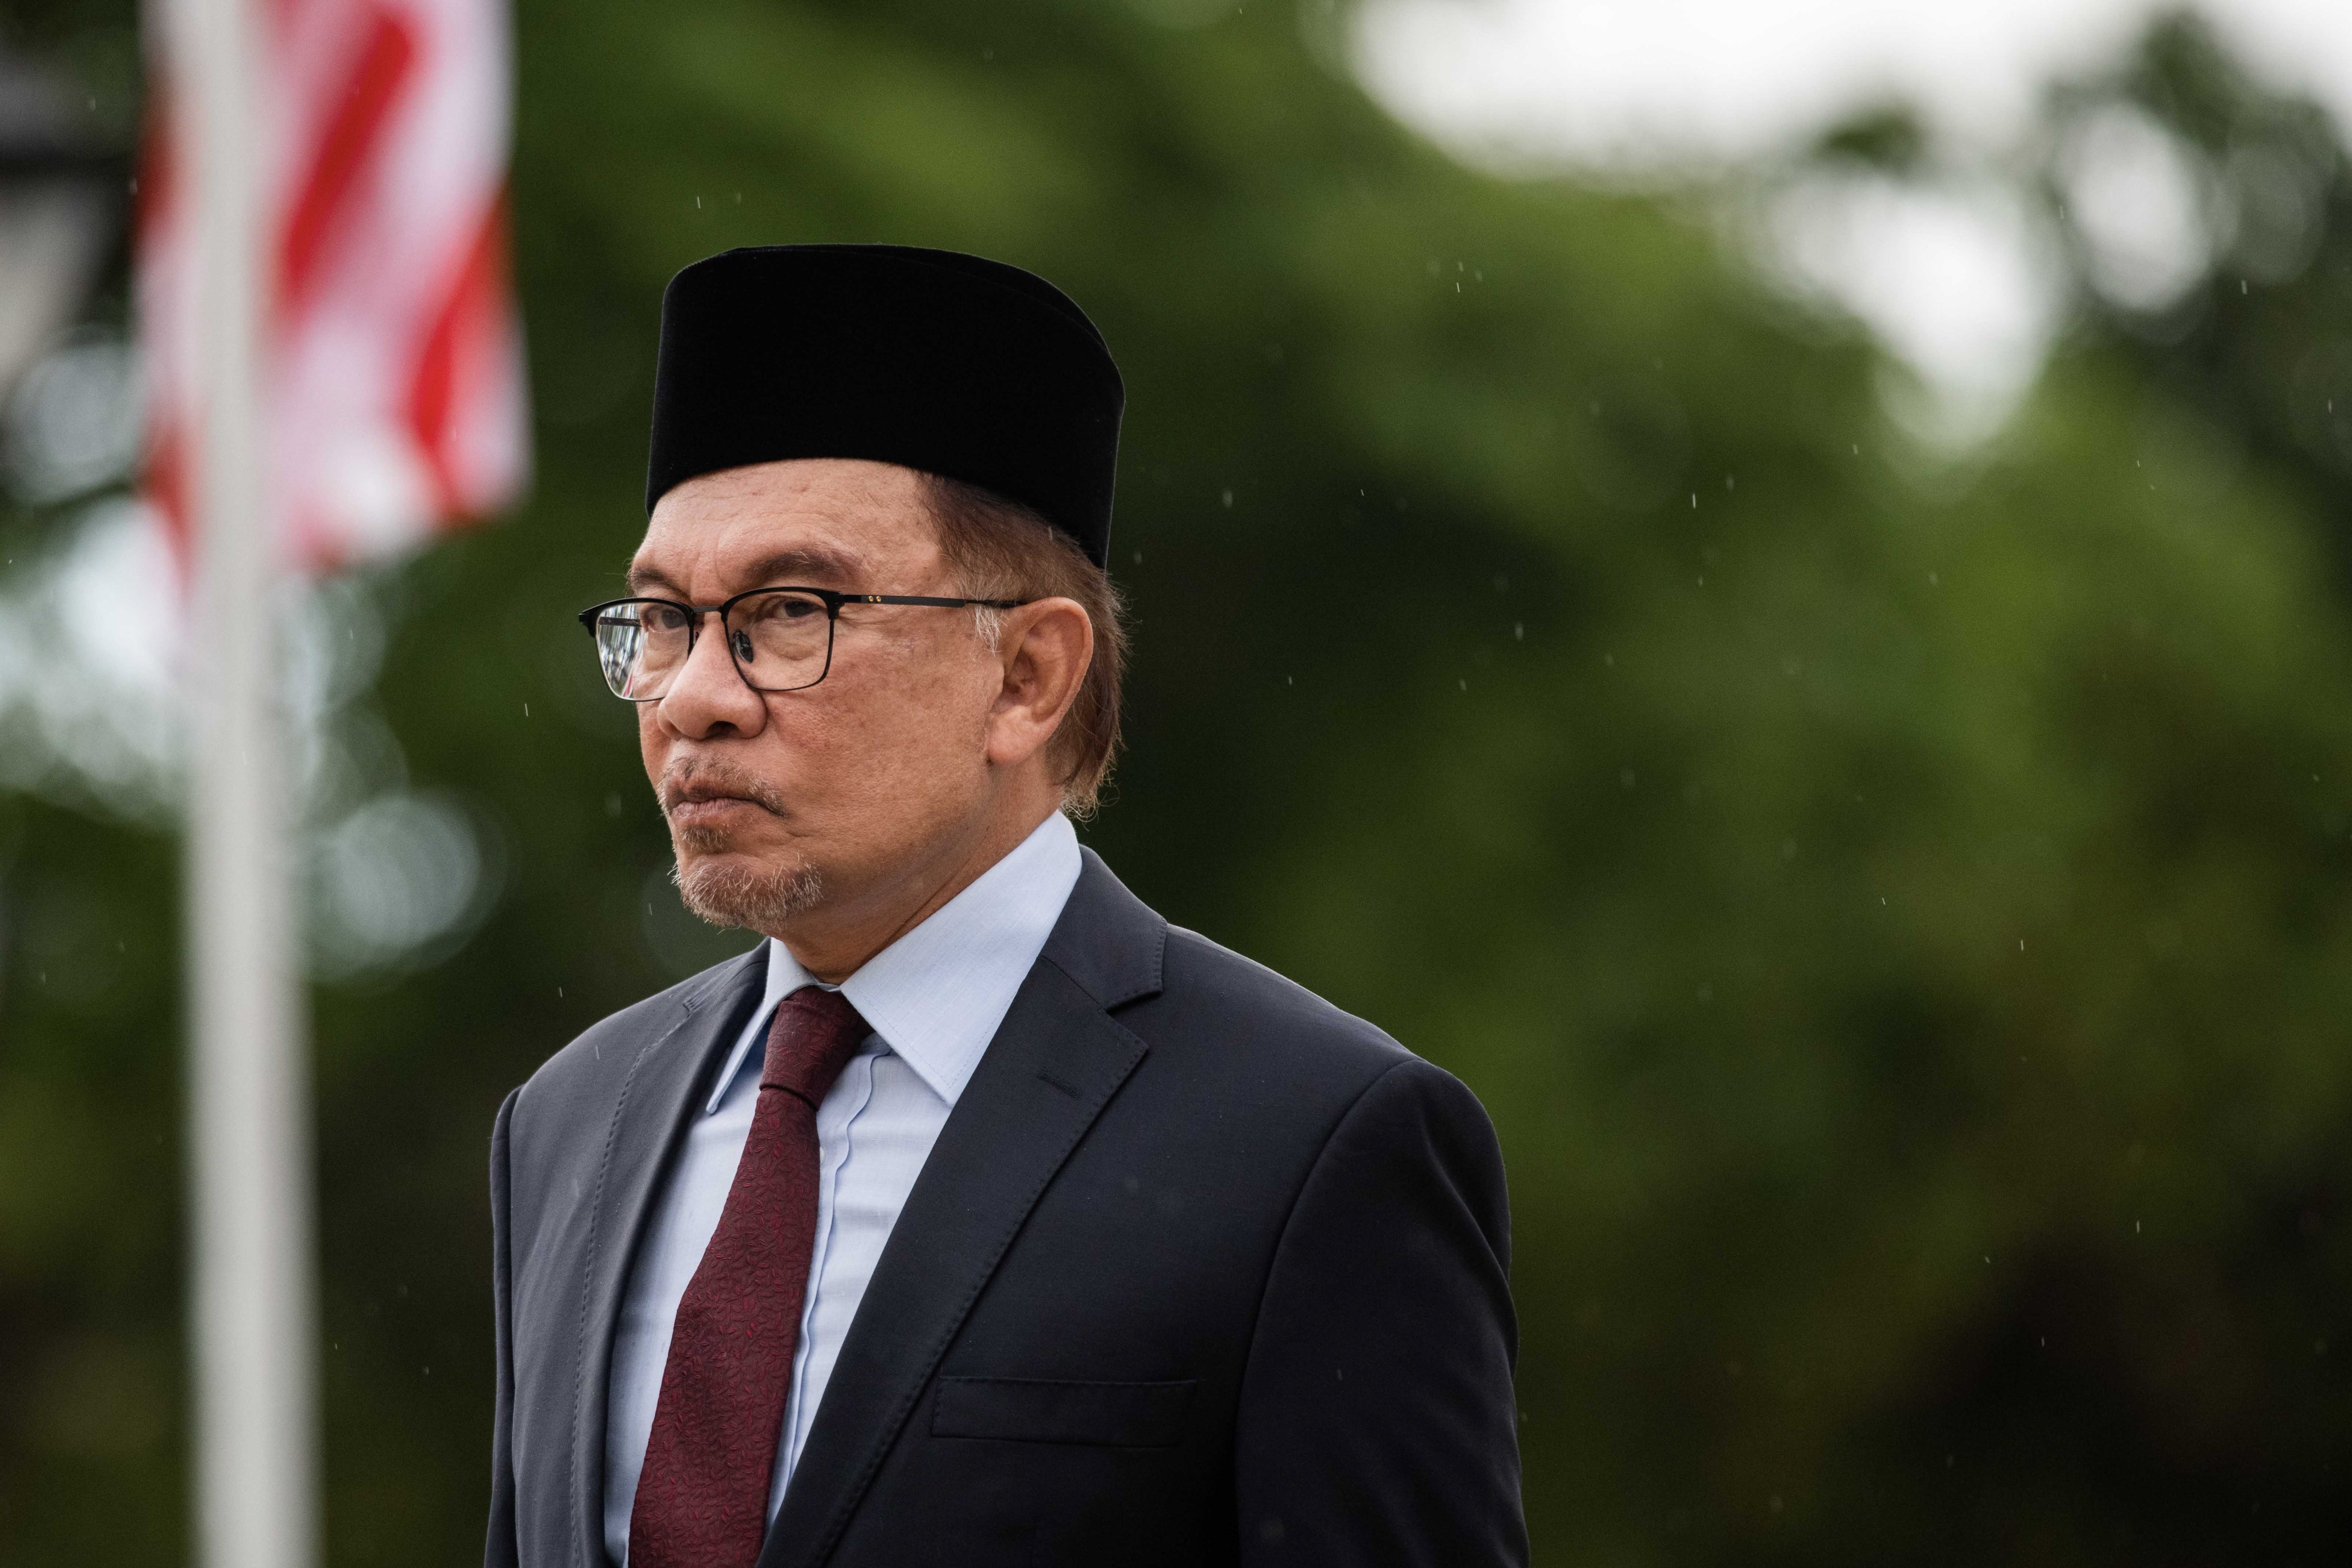 Malaysia’s Prime Minister Anwar Ibrahim said the government would take “appropriate action” against any insults or threats towards the nation’s royal institution. Photo: EPA-EFE/Pool